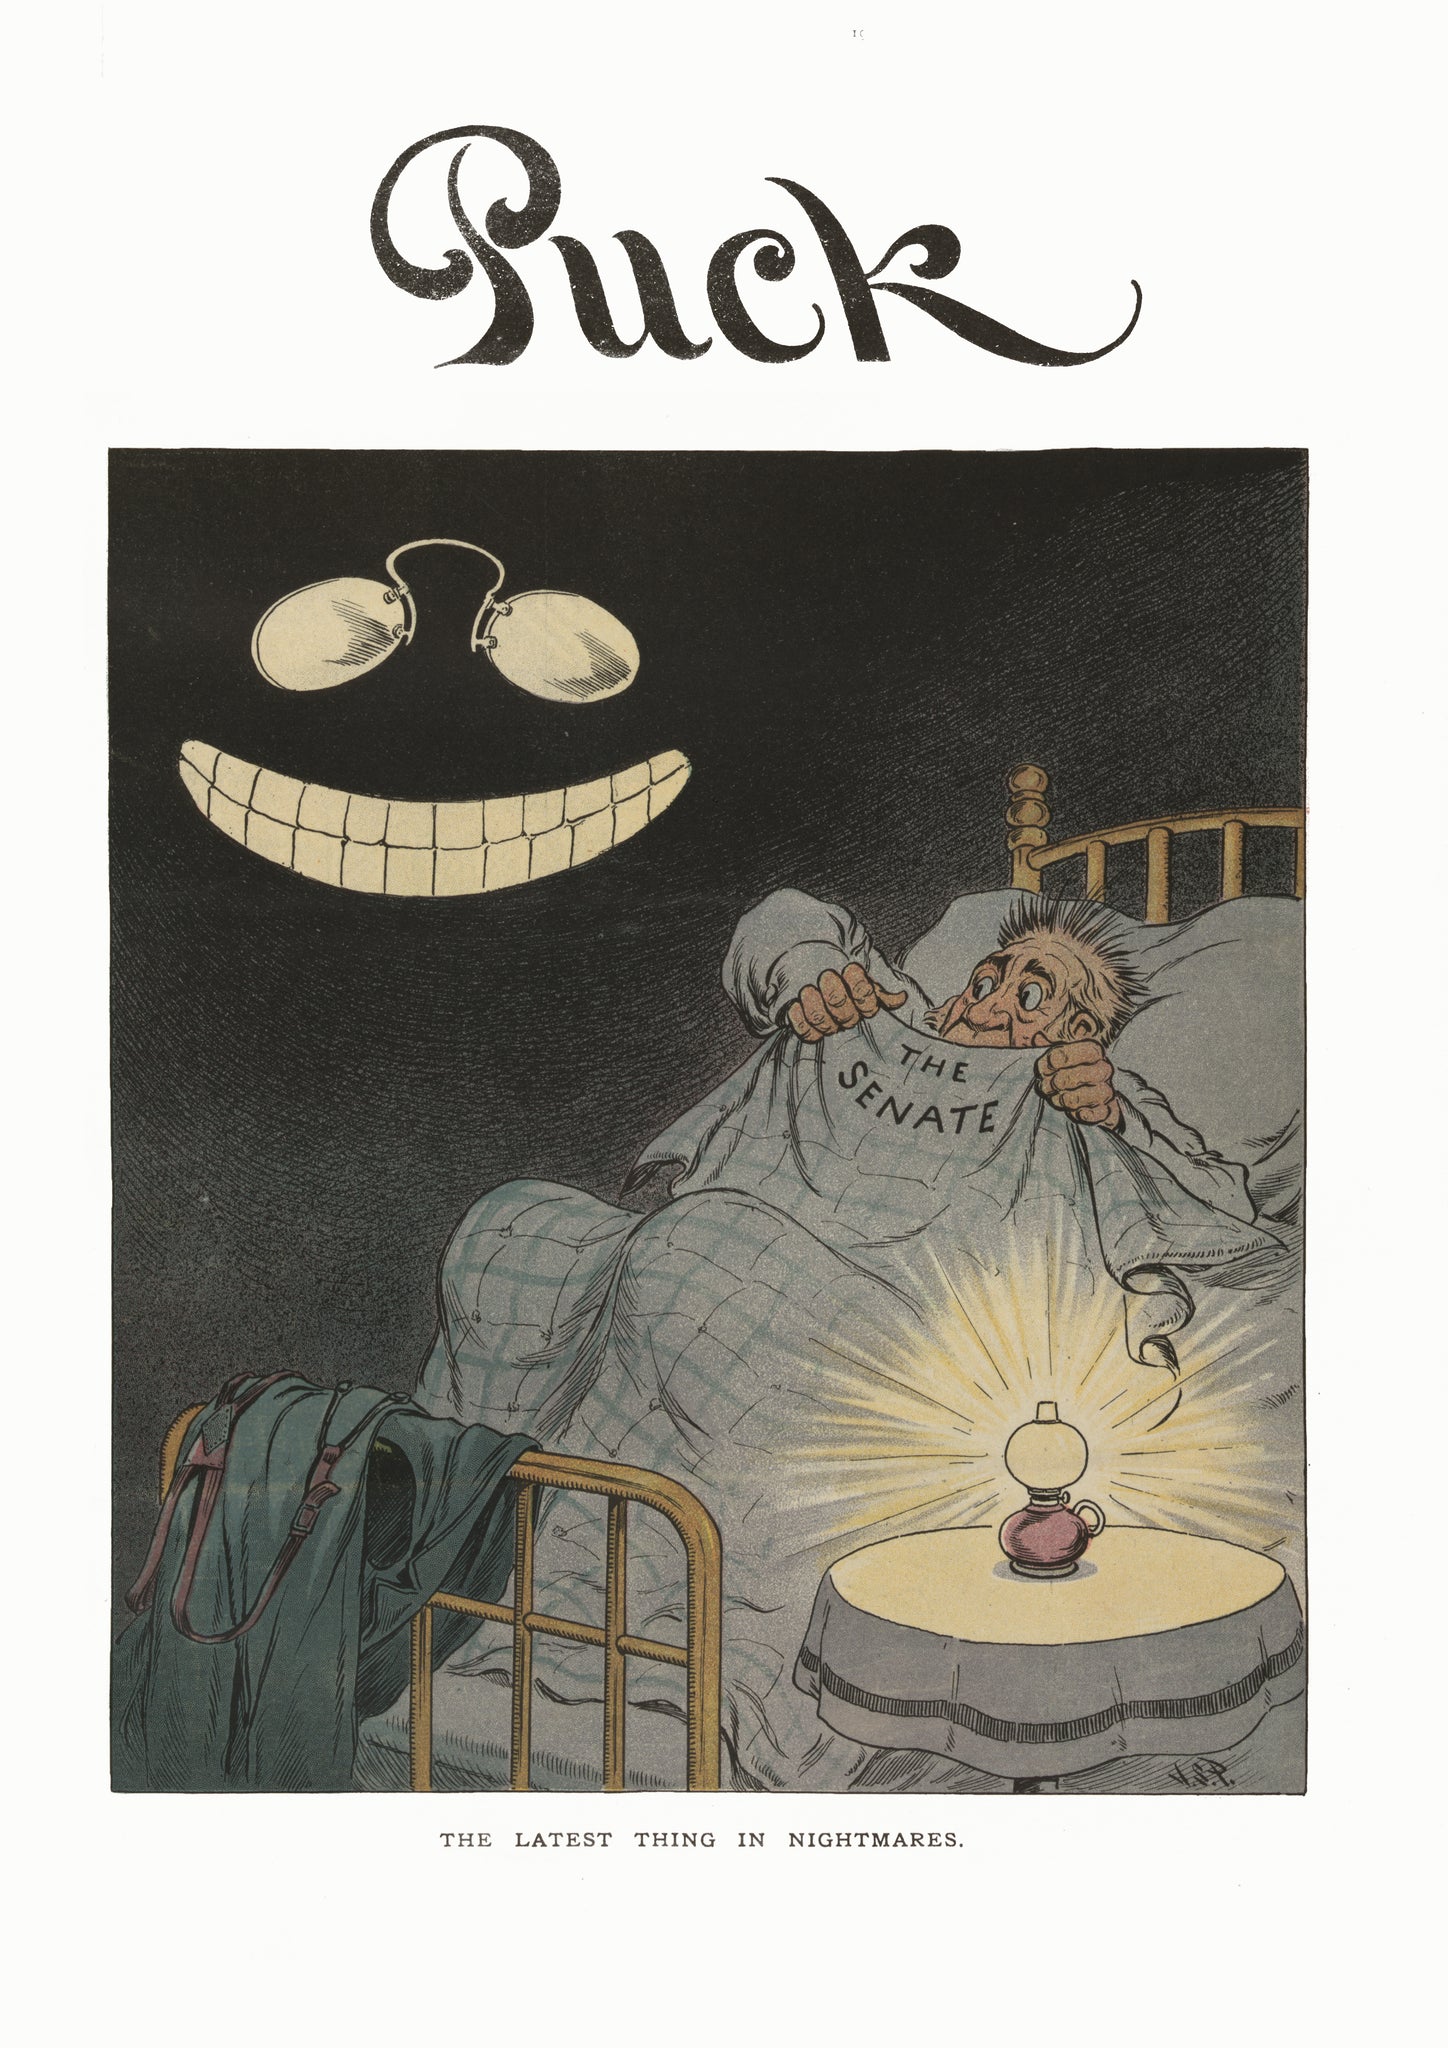 The latest thing in nightmares – Puck magazine cover